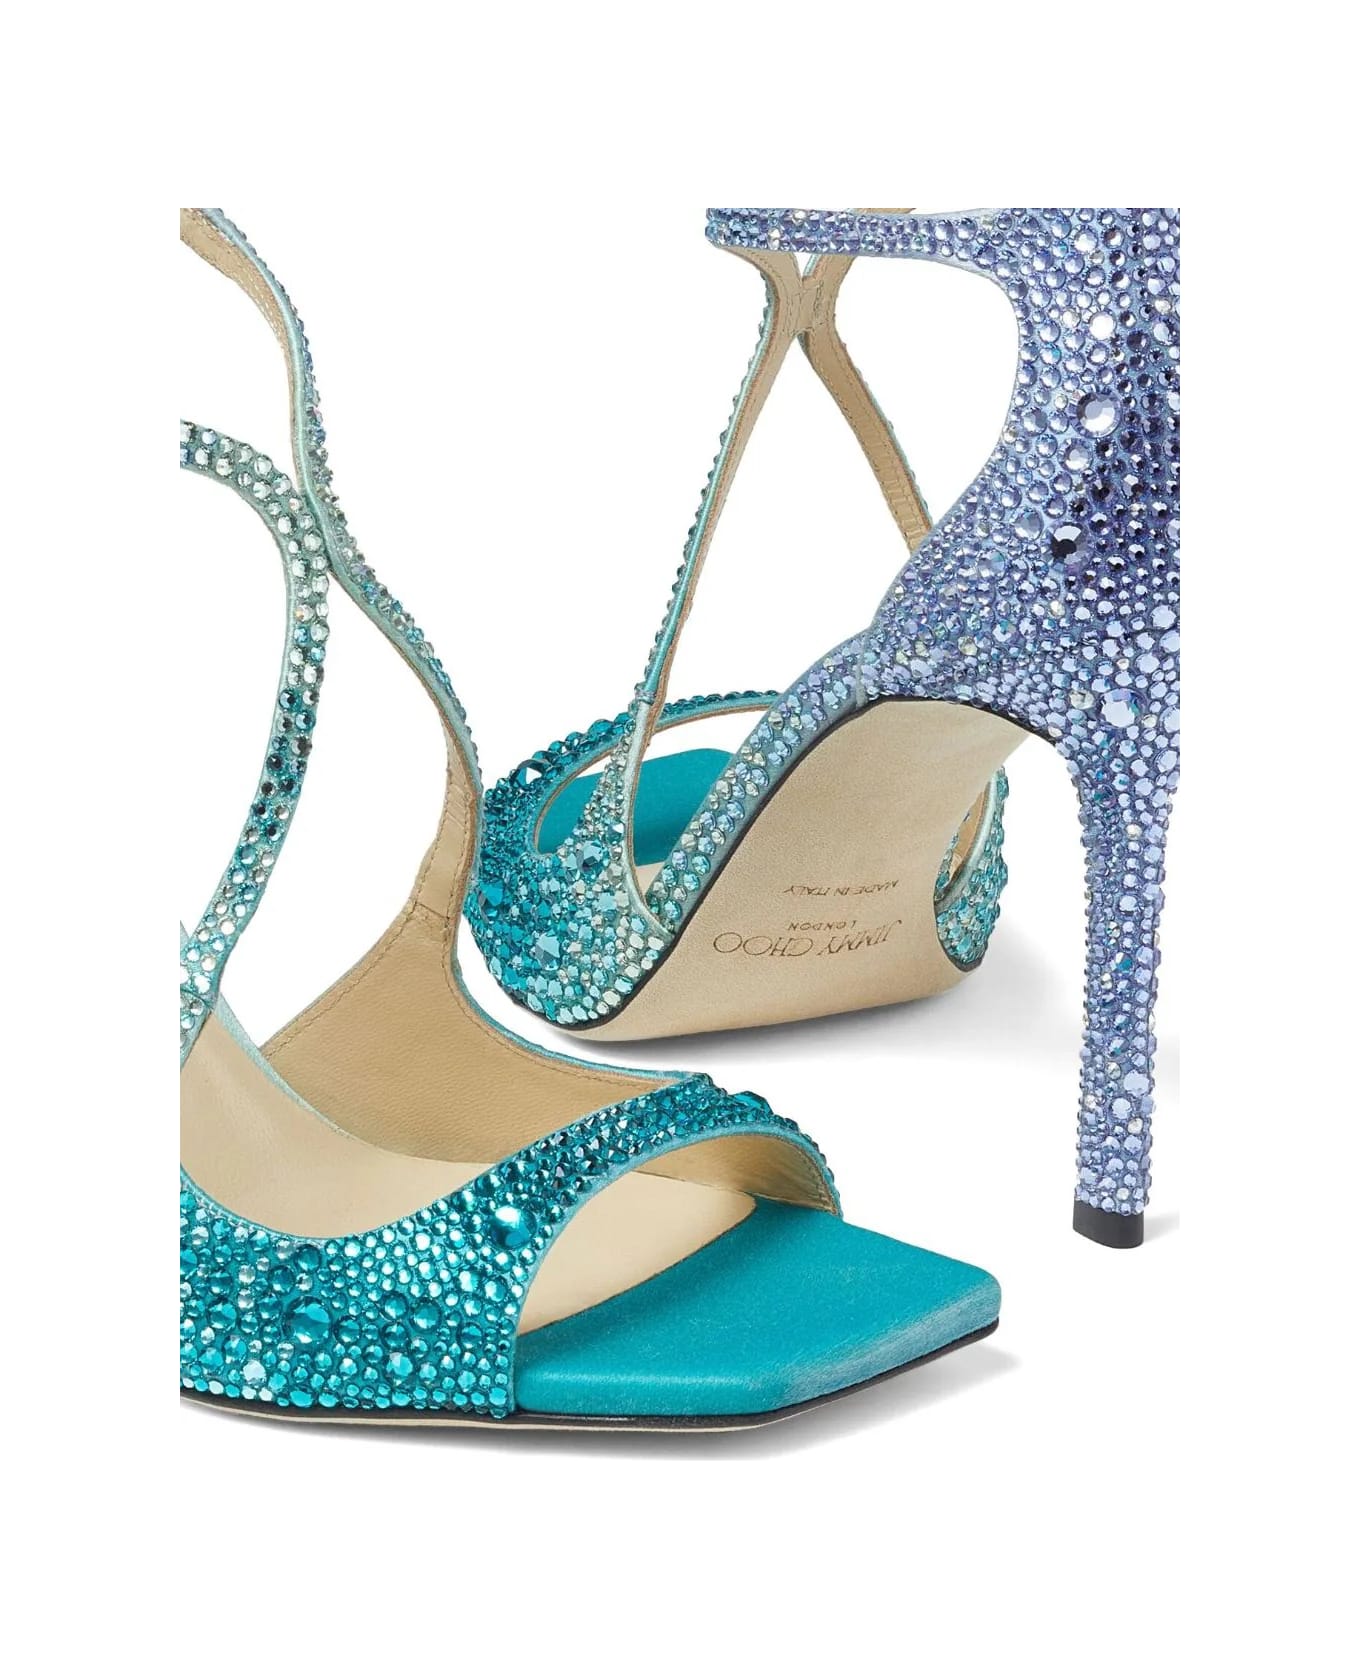 Jimmy Choo Azia 95 Sandal In Blue Peacock With Crystals - Blue